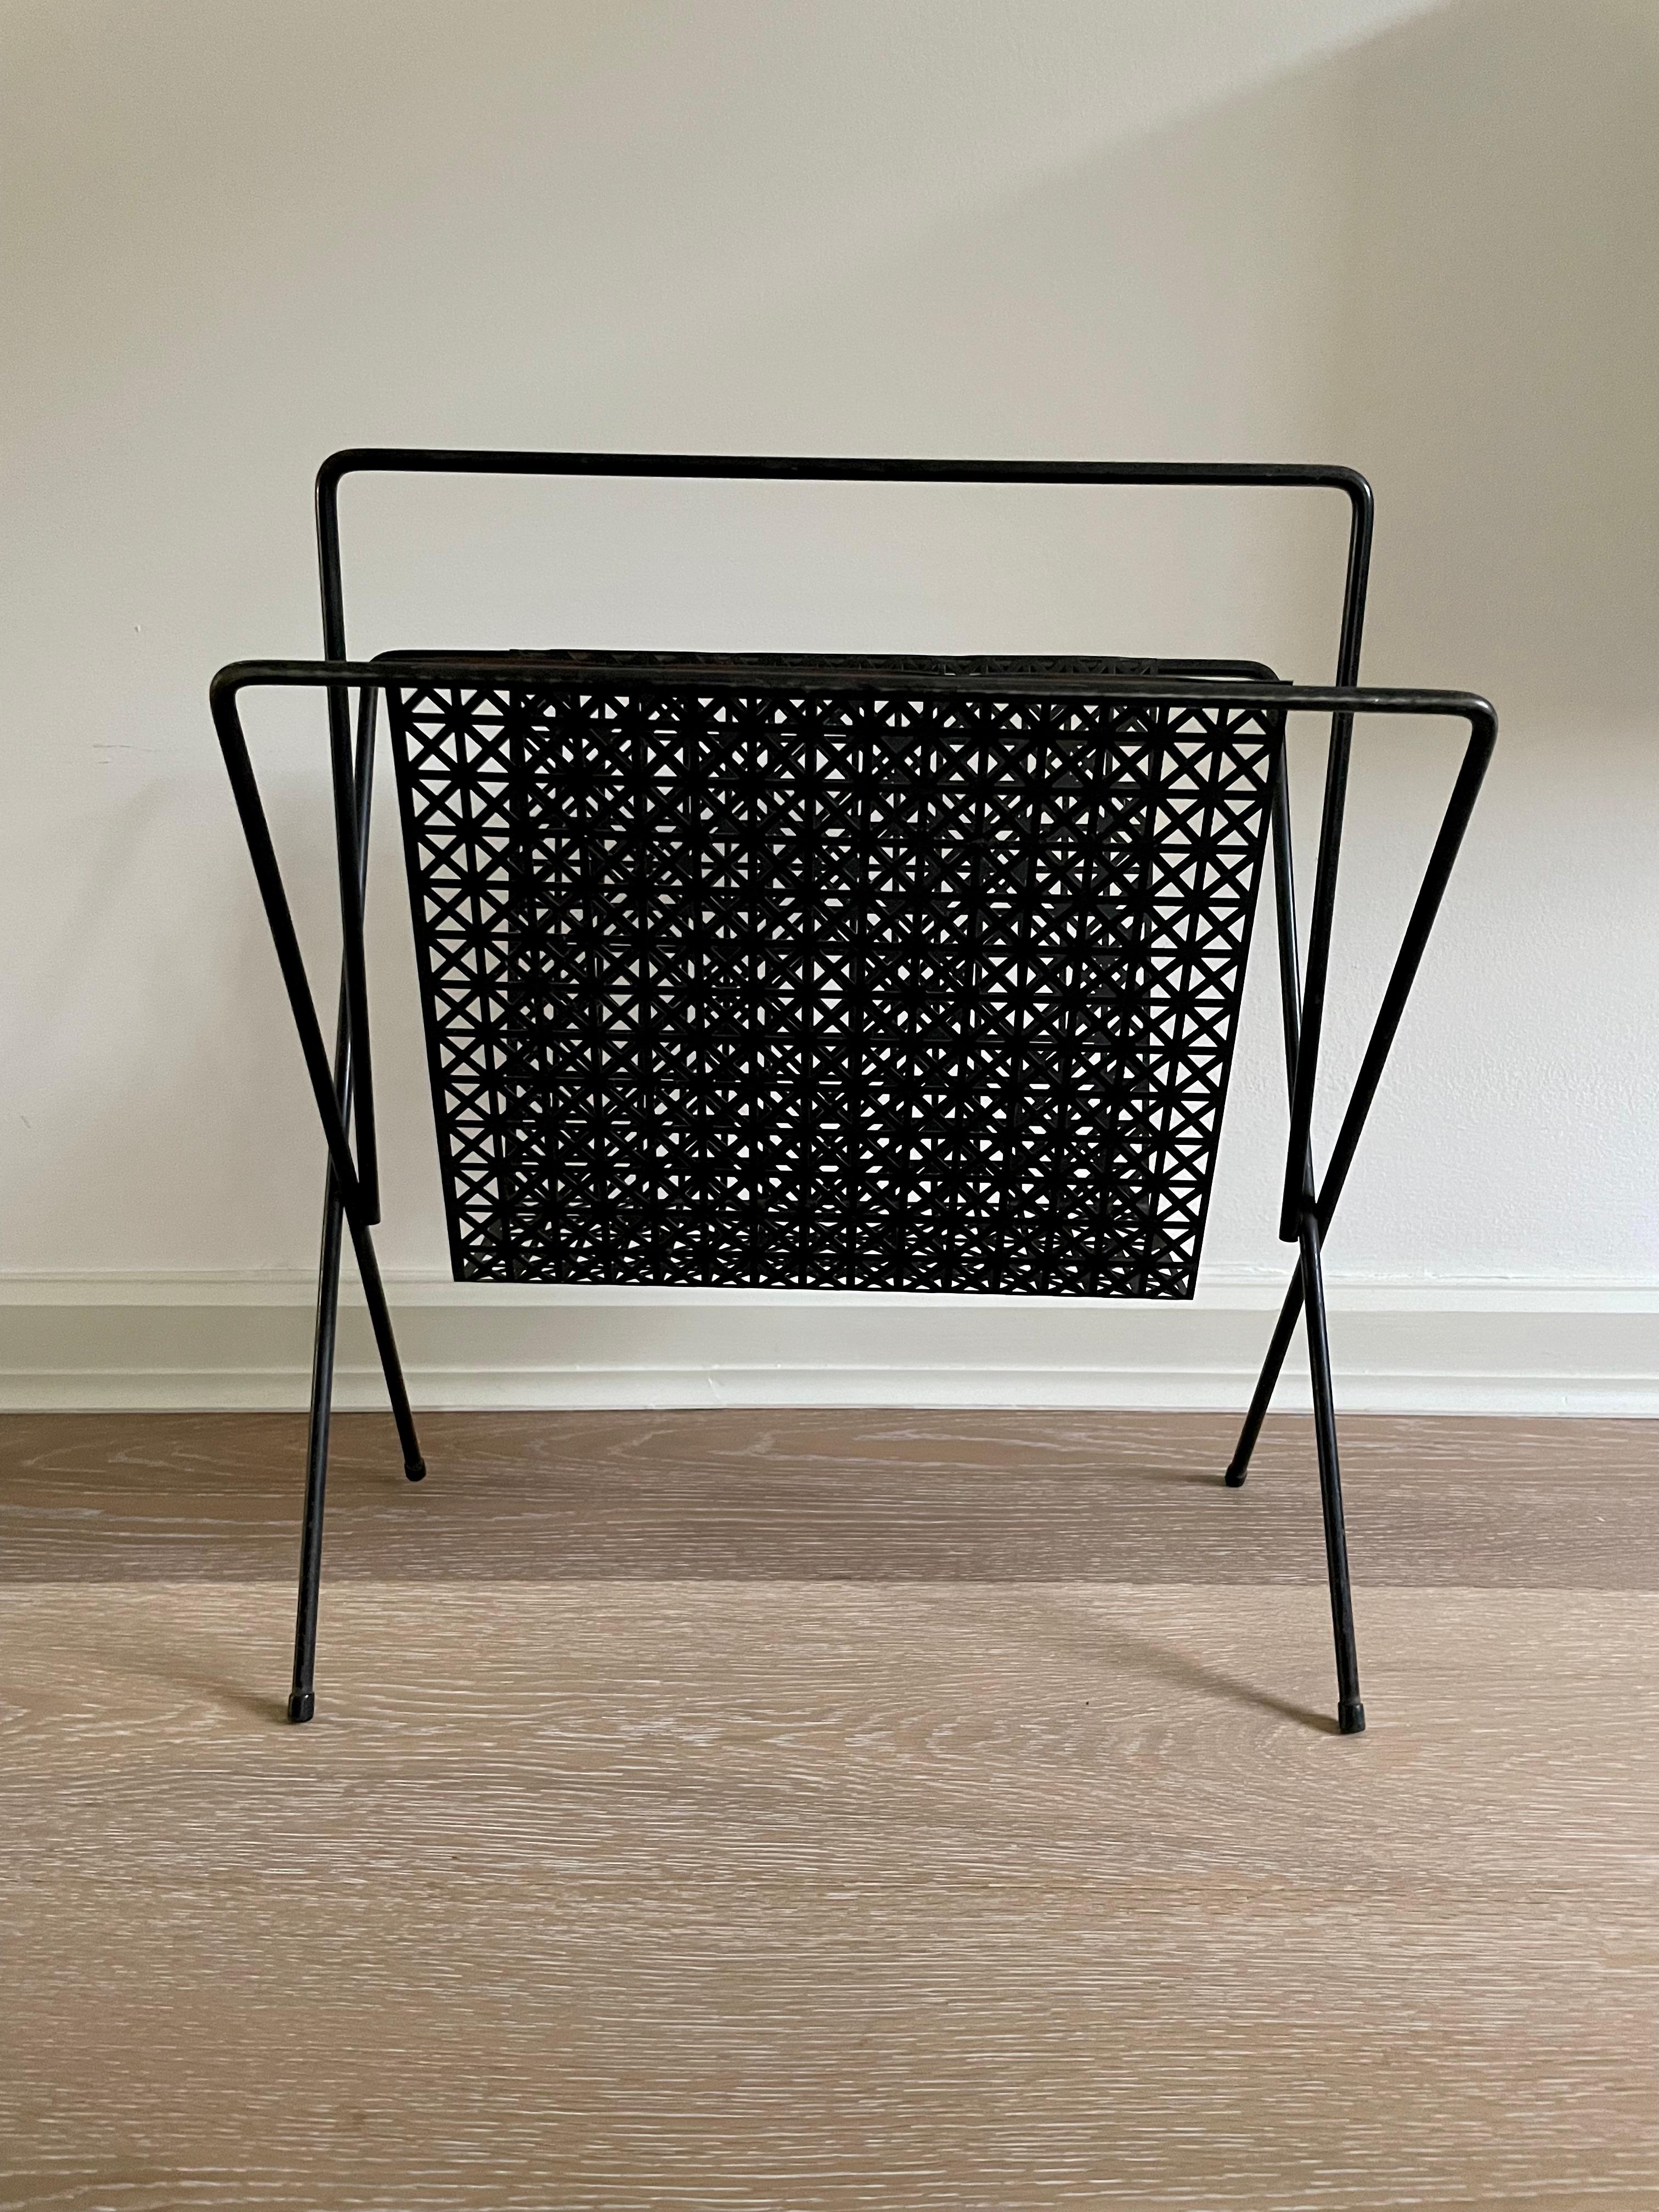 Black Iron Magazine rack in the Style of Mathieu Matégot.

Classic Matégot style perforated bent metal magazine rack in black.

Some wear consistent with age and use, but it adds to the items overall charm and antiqued aesthetic.